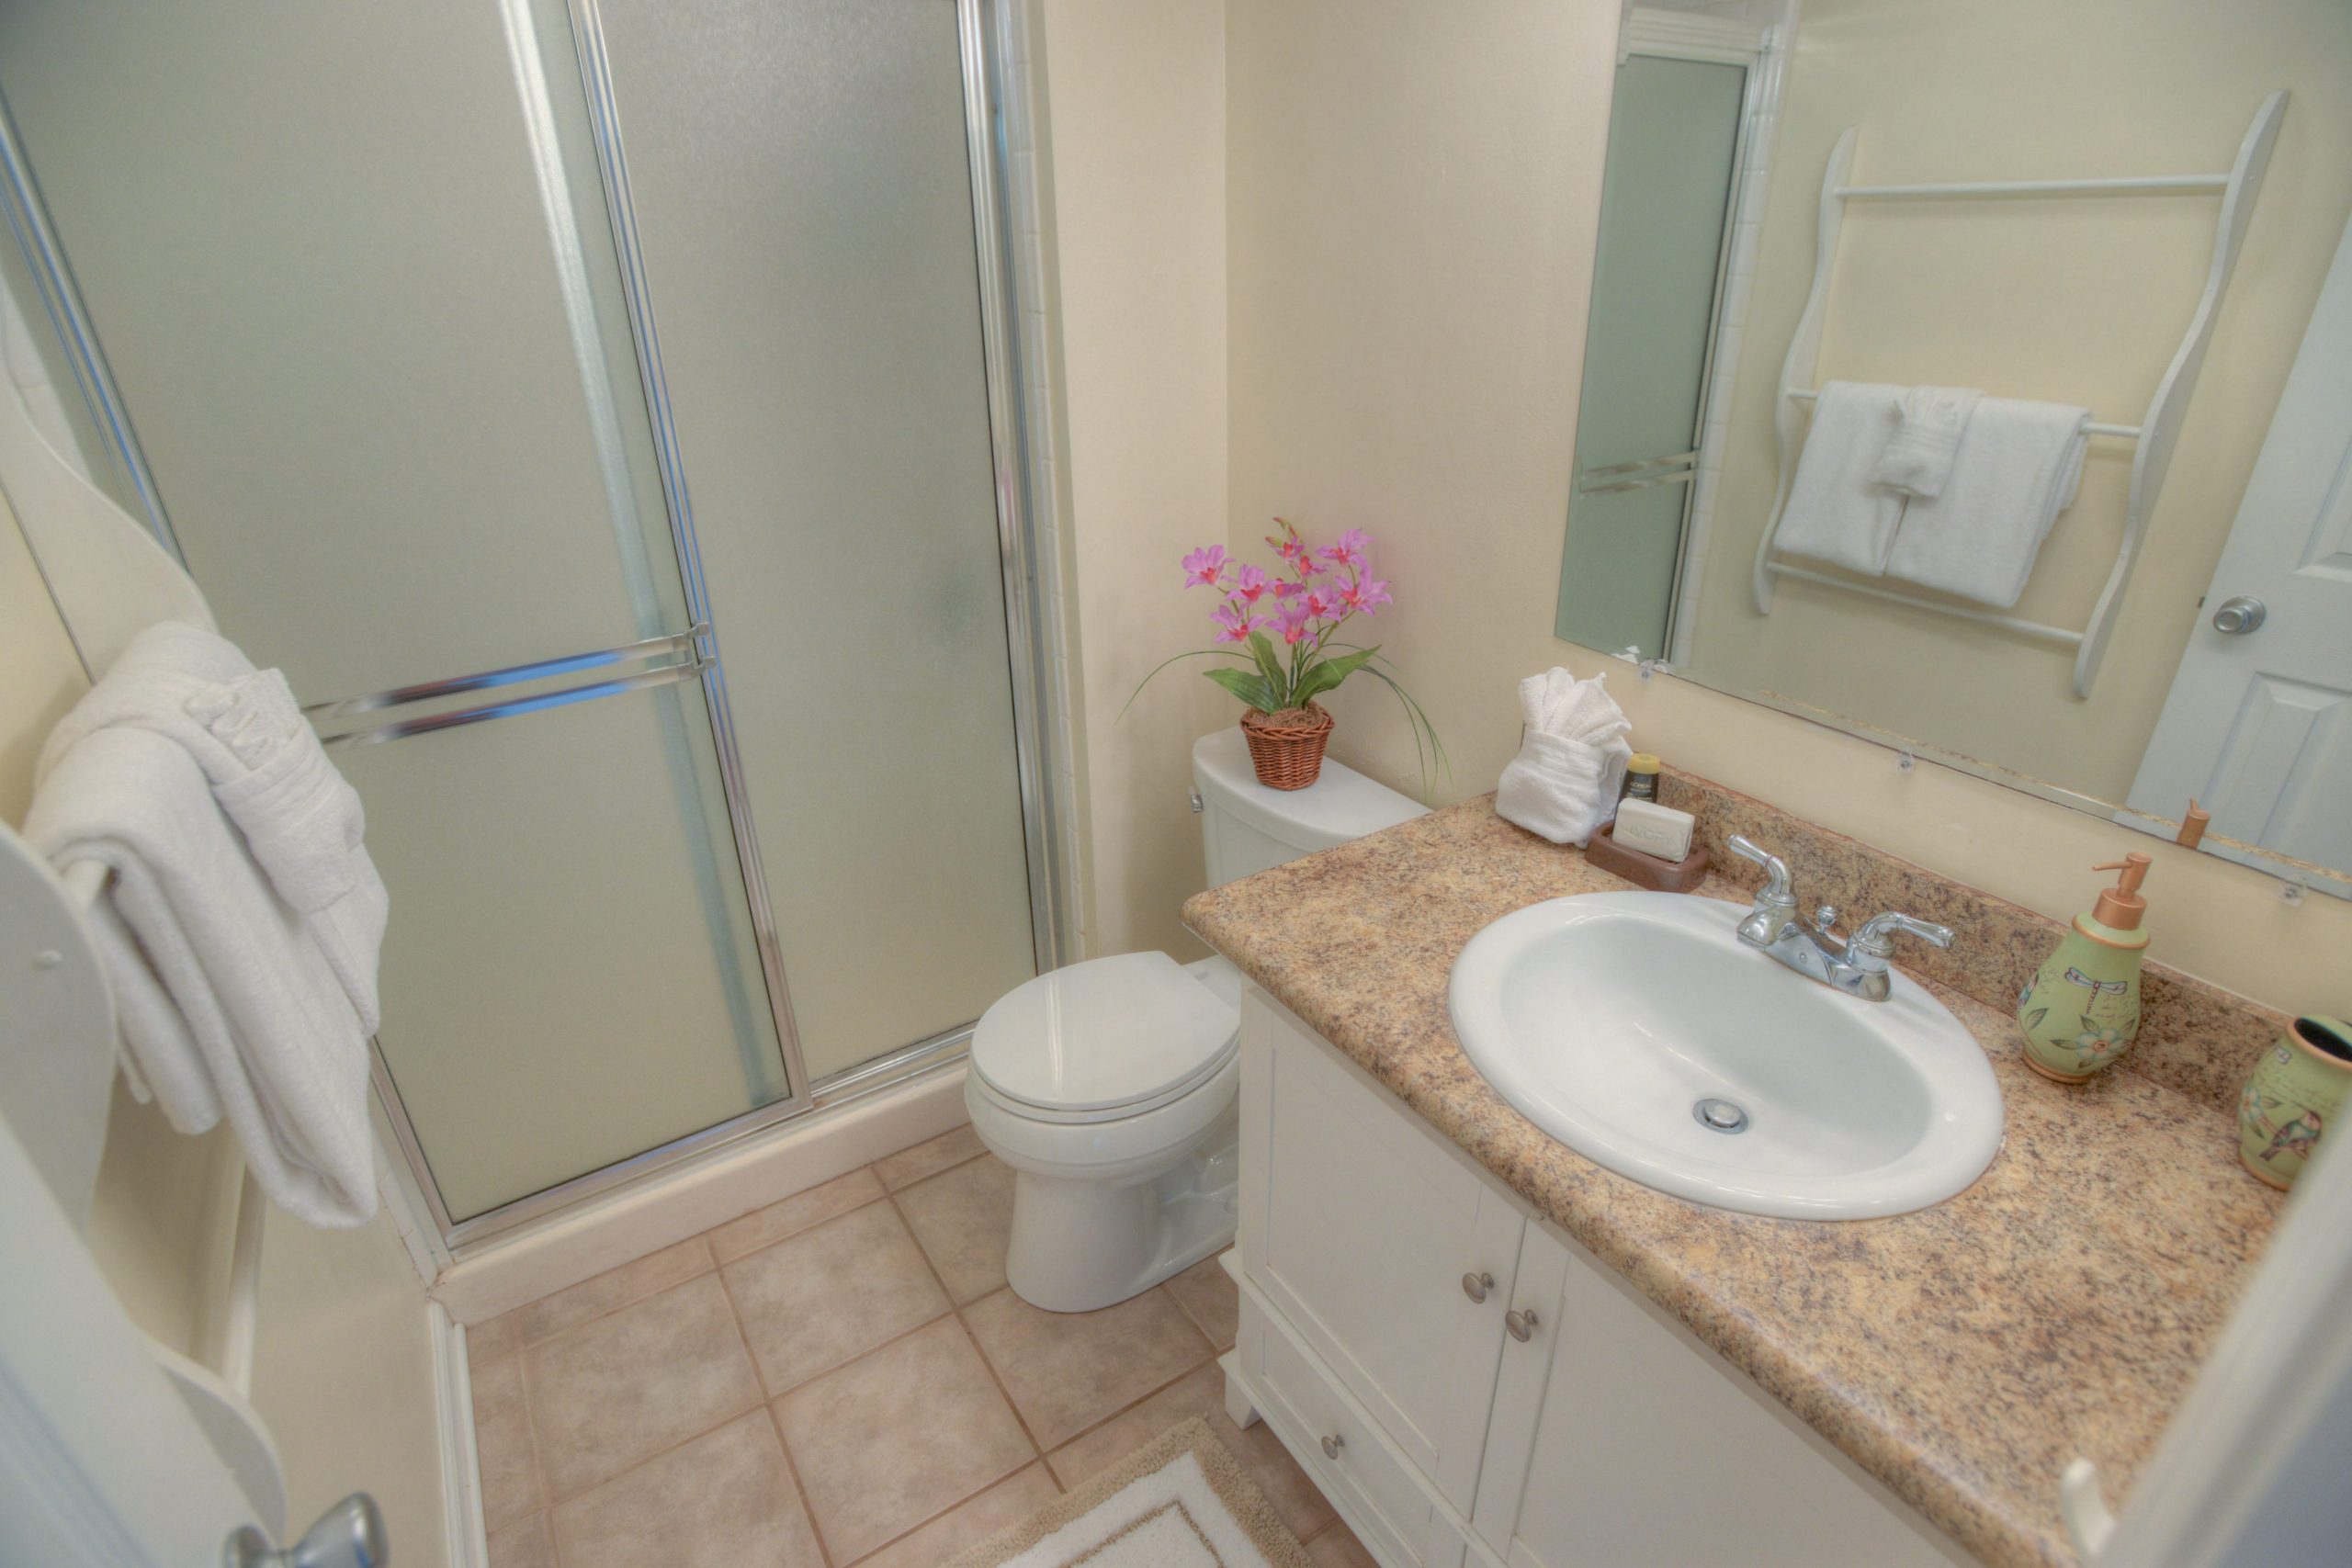 Convenience Guests Appreciate - The presence of multiple bathrooms is a convenience guests will appreciate. No waiting in line for the shower!